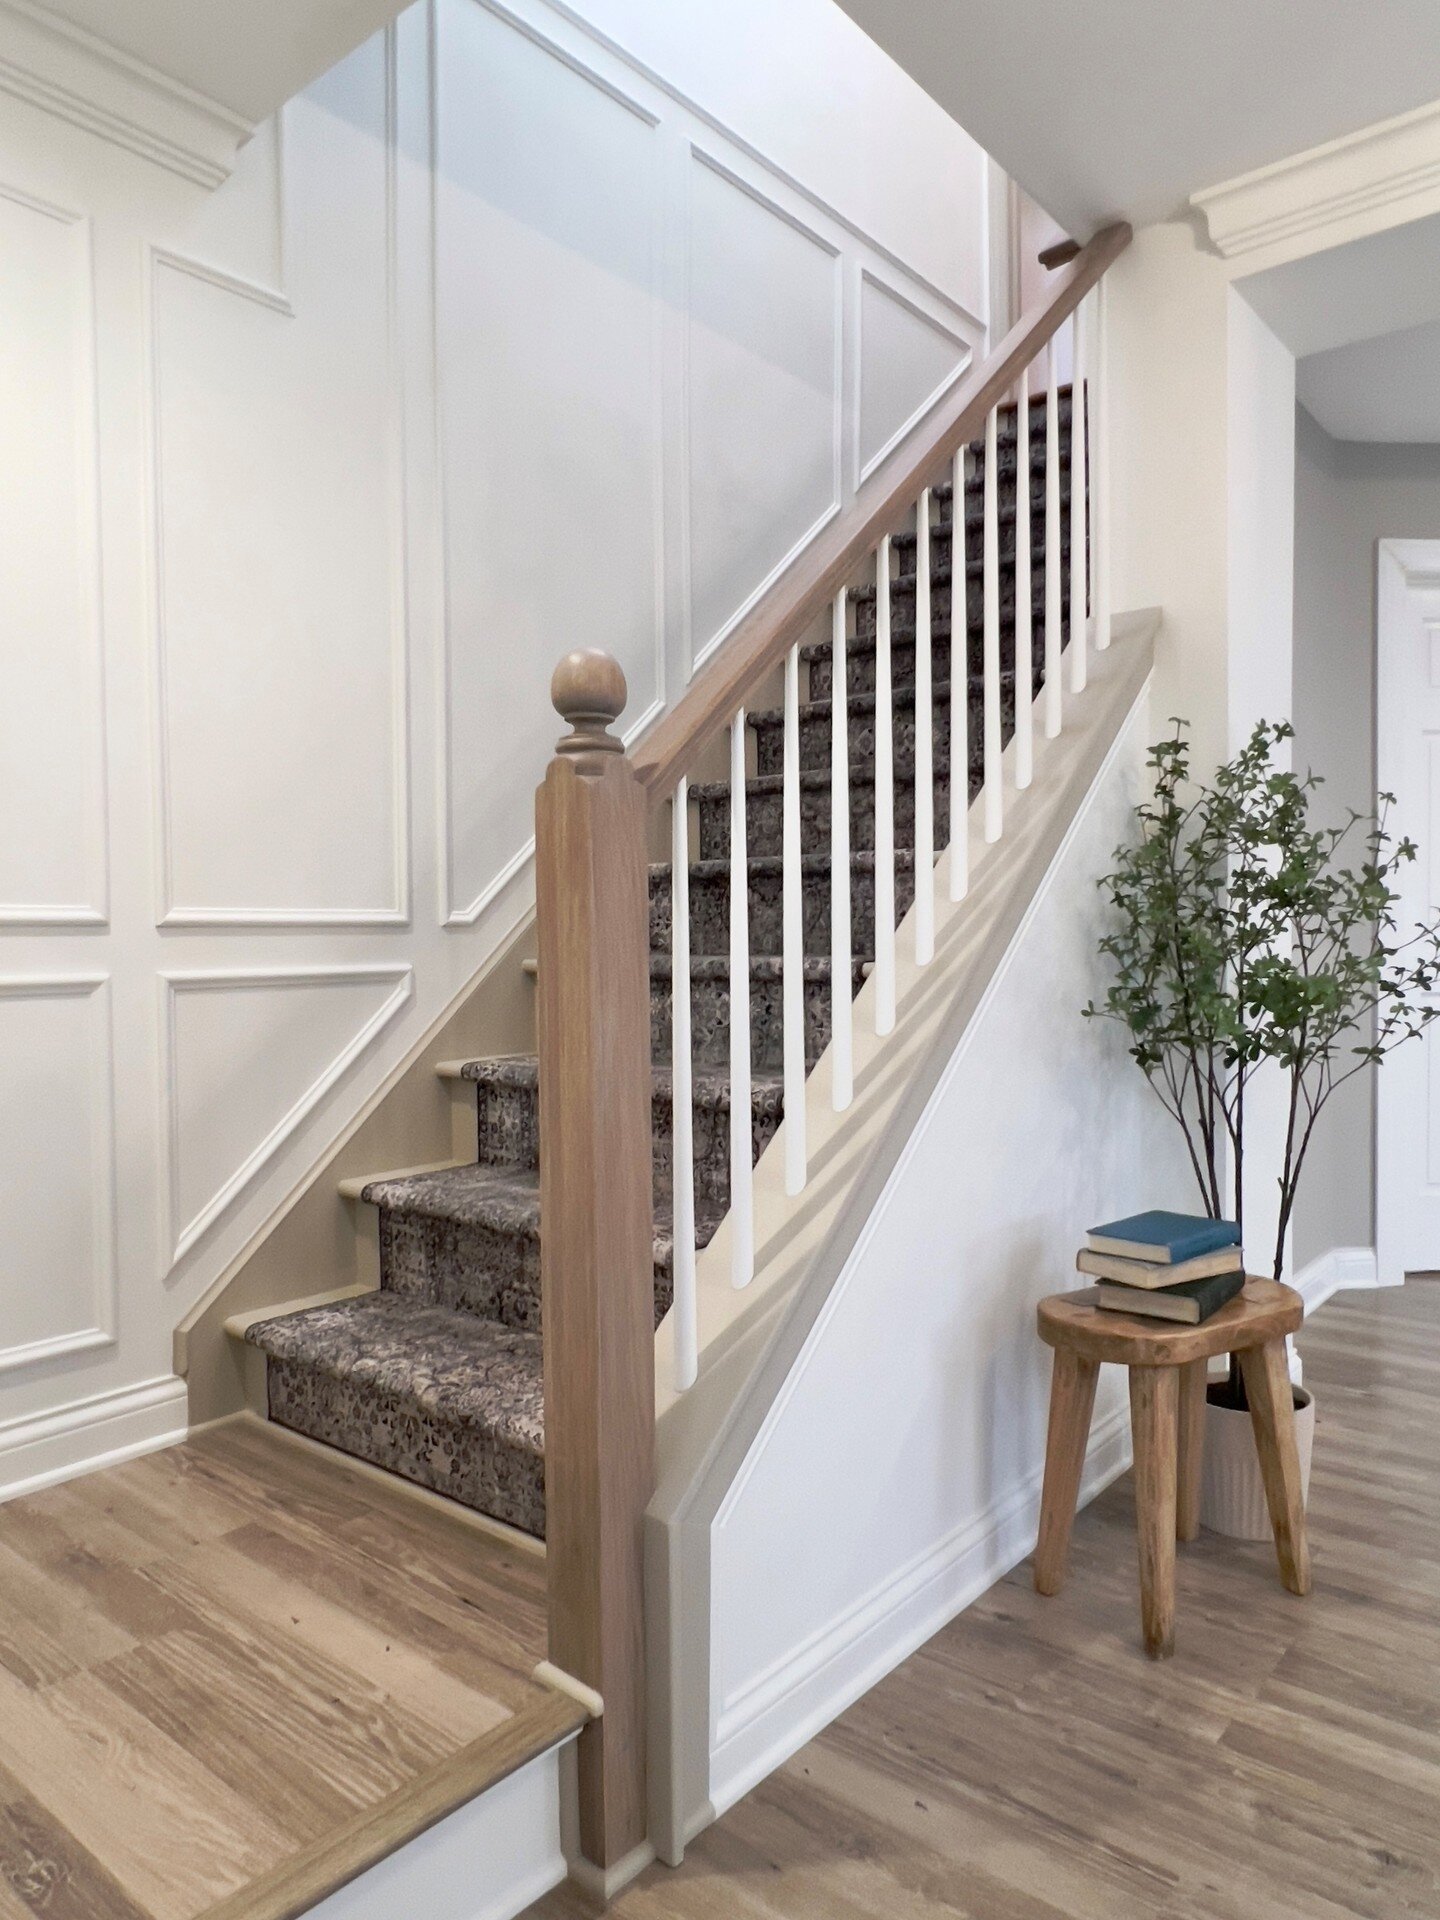 Our wooden balusters are a classic choice that never goes out of style. Choose from a wide range of designs and finishes to create the perfect look for your home.
-
📷 @juliachristinehome
-
#LJSmith #StairExperts #StairInspiration #StairRemodel #Time